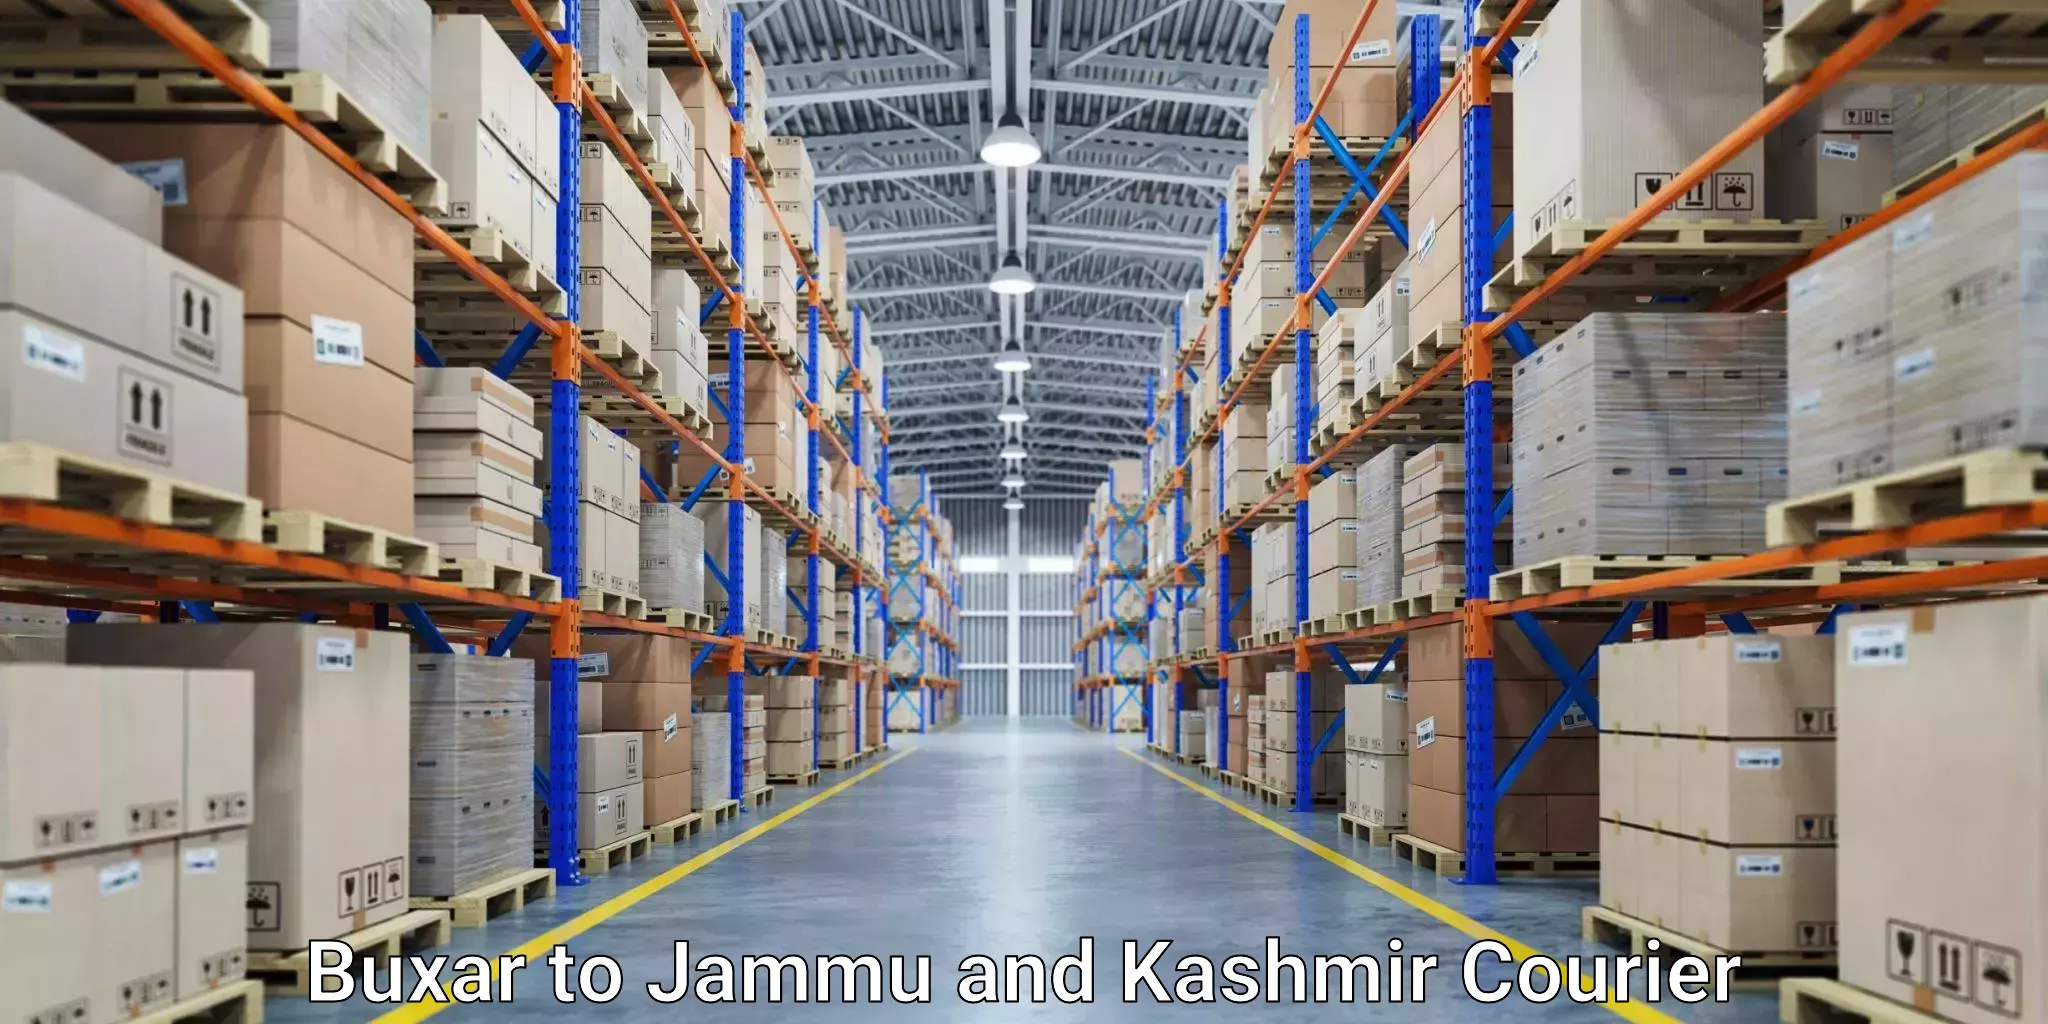 Customer-focused courier Buxar to Jammu and Kashmir